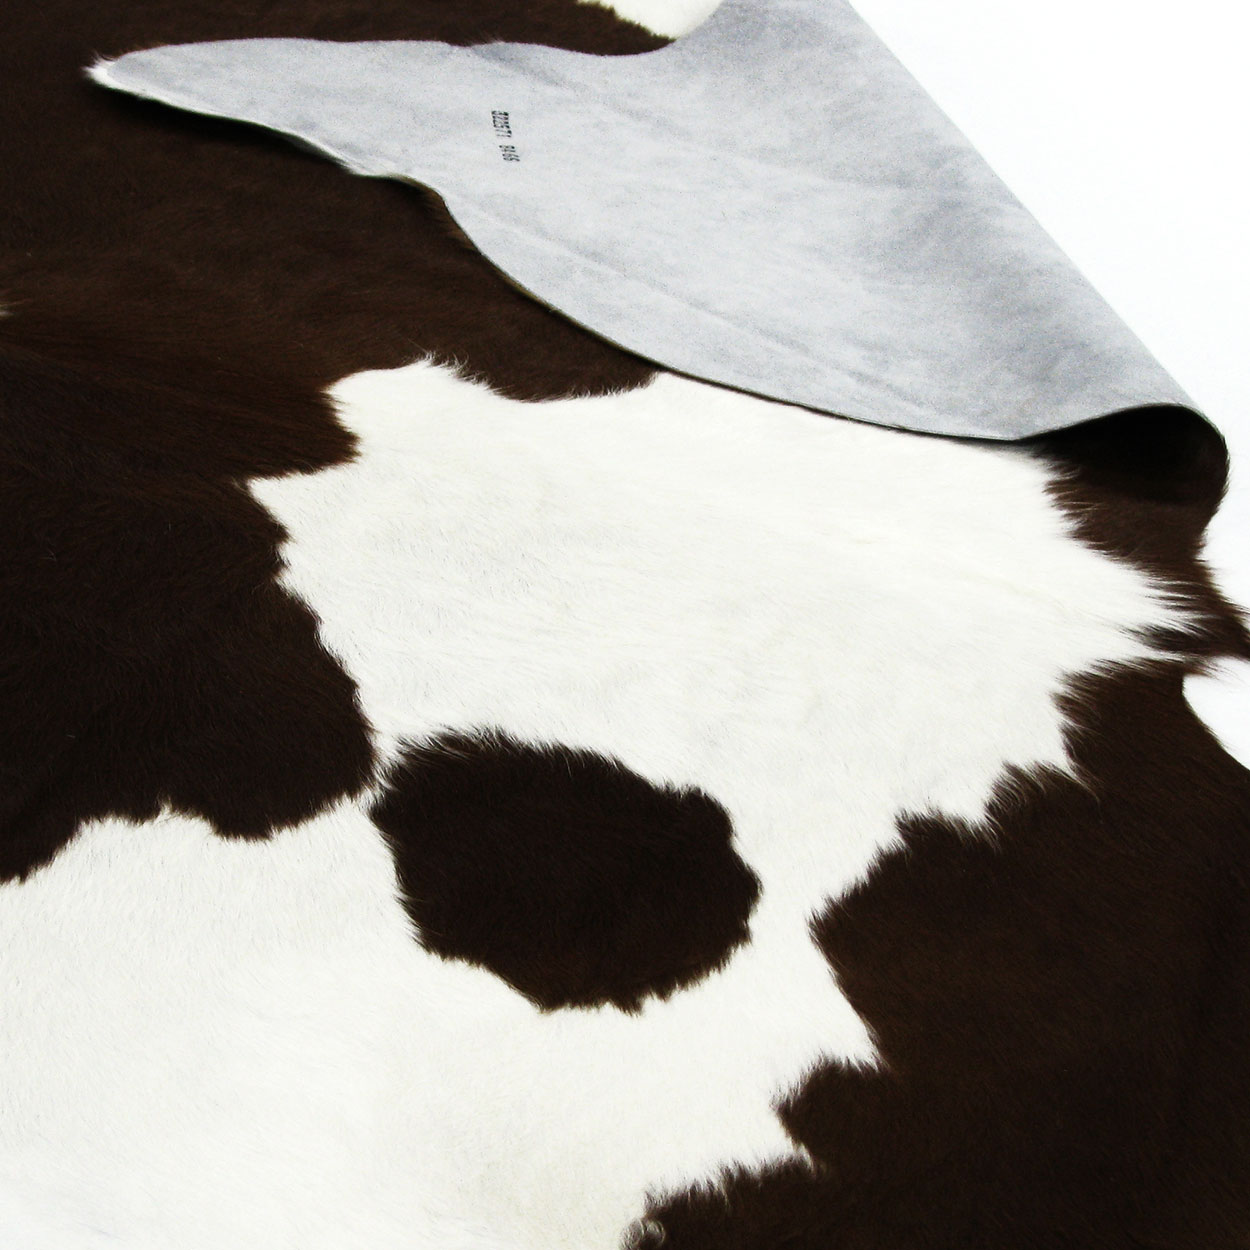 328393 - Value Line Grade B Natural Chocolate and White Cowhide